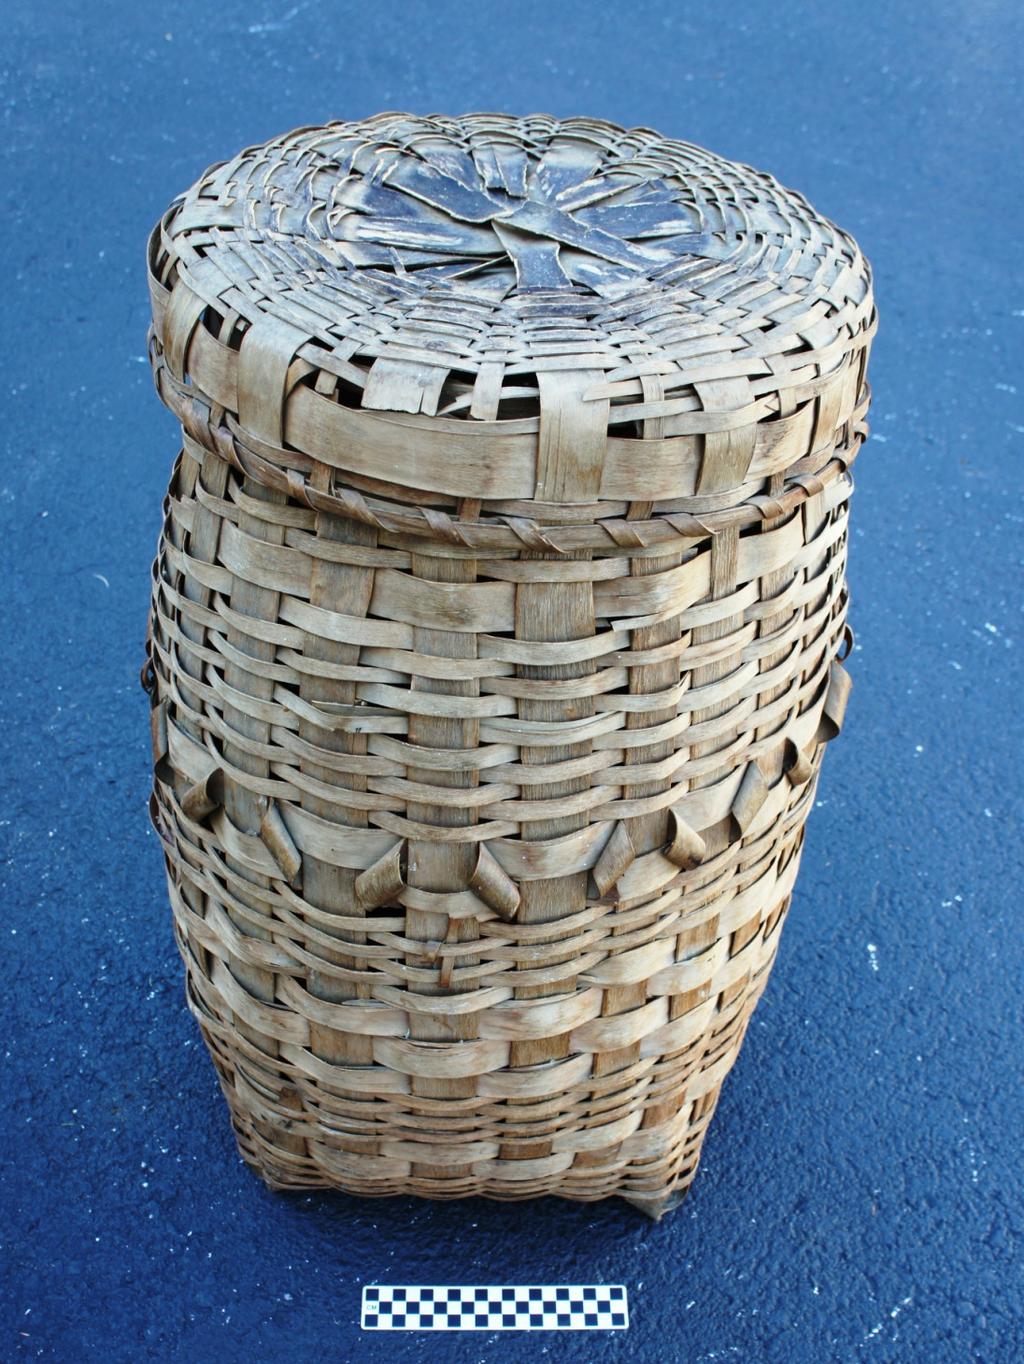 The last large decorated example in the Wôbanakik Heritage Center collections is a more or less cylindrical basket with a square plaited bottom.